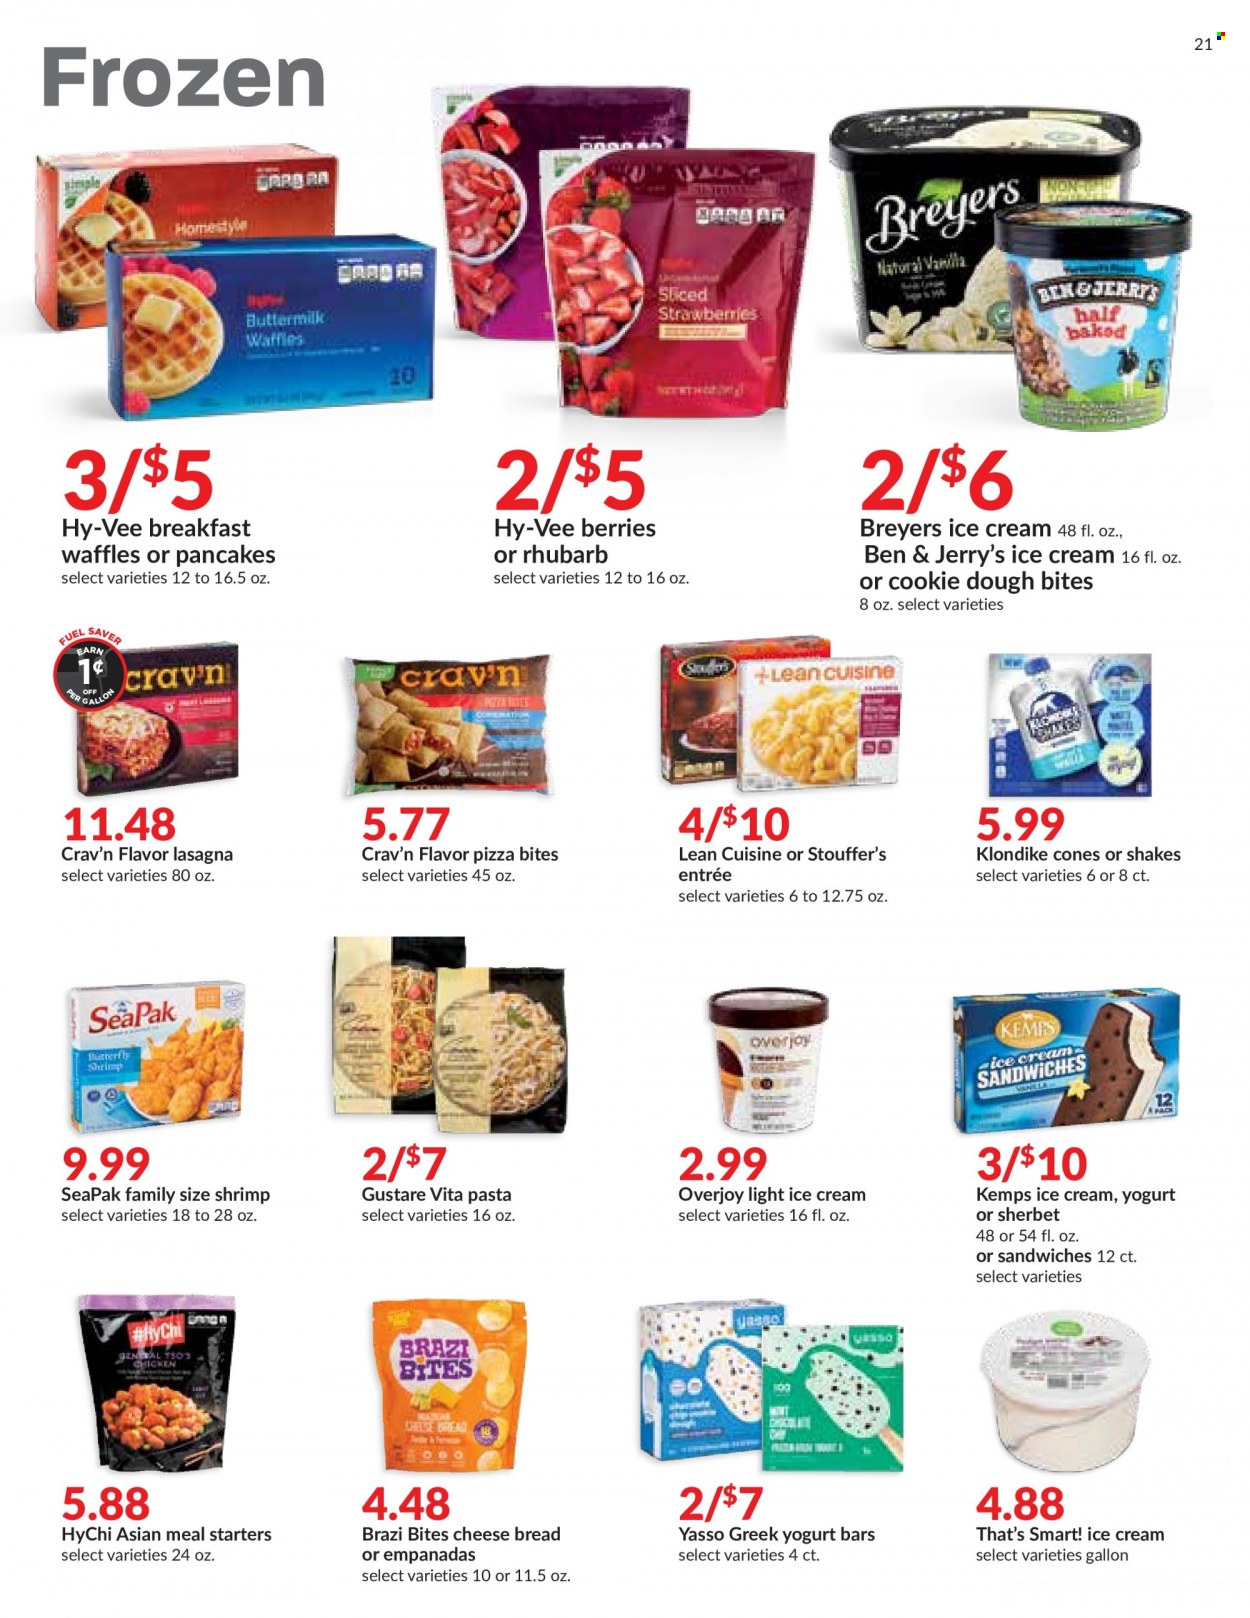 thumbnail - Hy-Vee Flyer - 09/22/2021 - 09/28/2021 - Sales products - bread, waffles, rhubarb, shrimps, pizza, pasta, lasagna meal, Lean Cuisine, Kemps, greek yoghurt, shake, ice cream, sherbet, Stouffer's, cookie dough, gallon. Page 21.